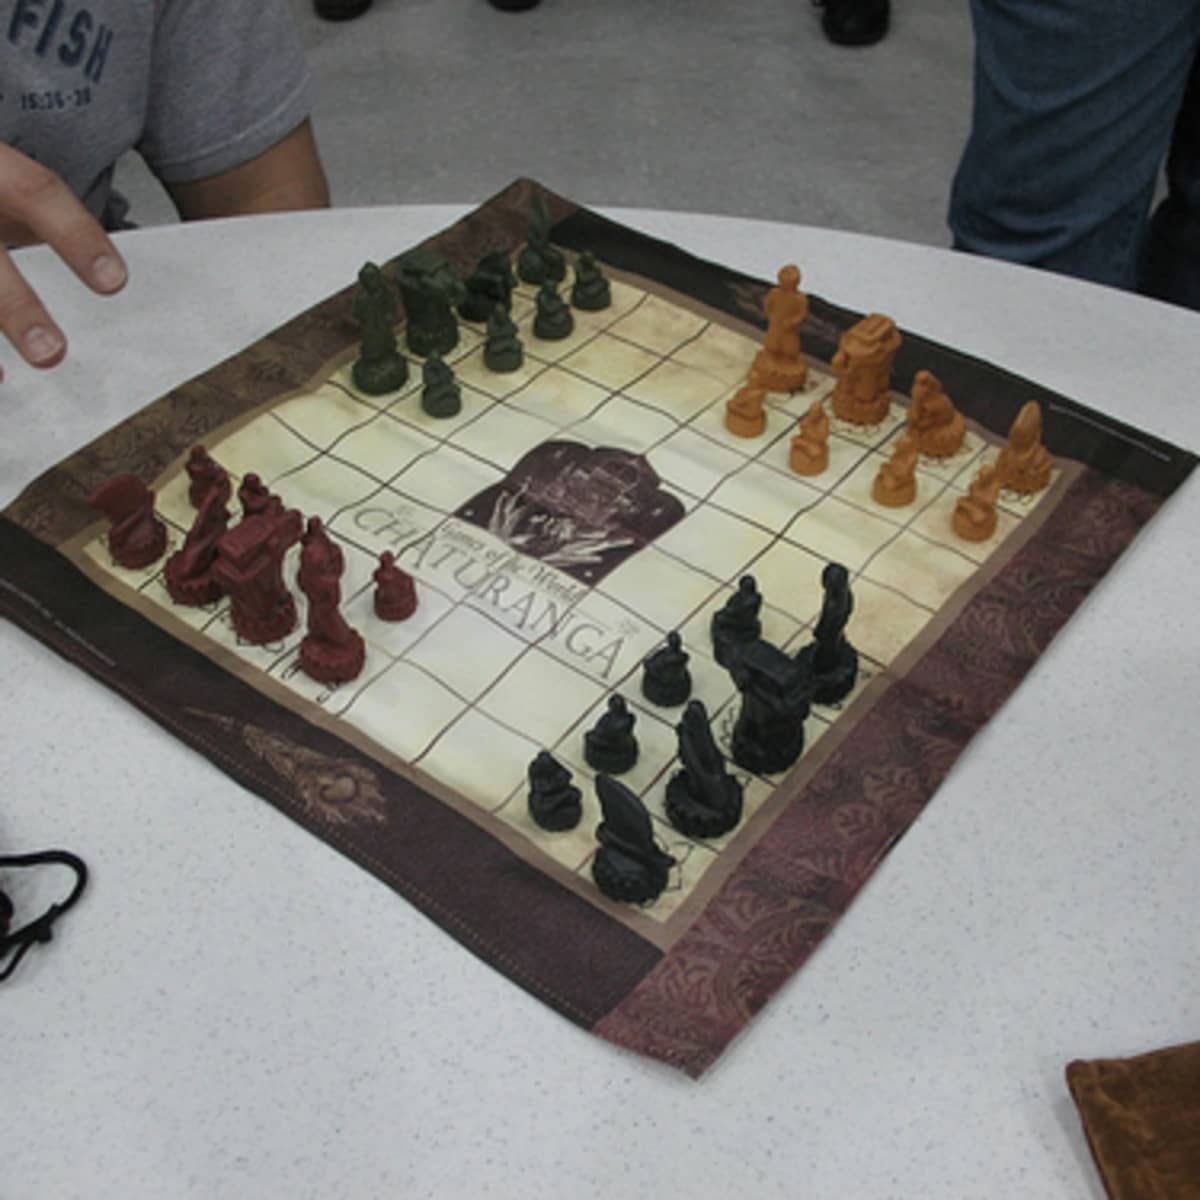 I knew Chaturanga was old but didn't know it was first, I am not too sure  this is correct either. : r/chess